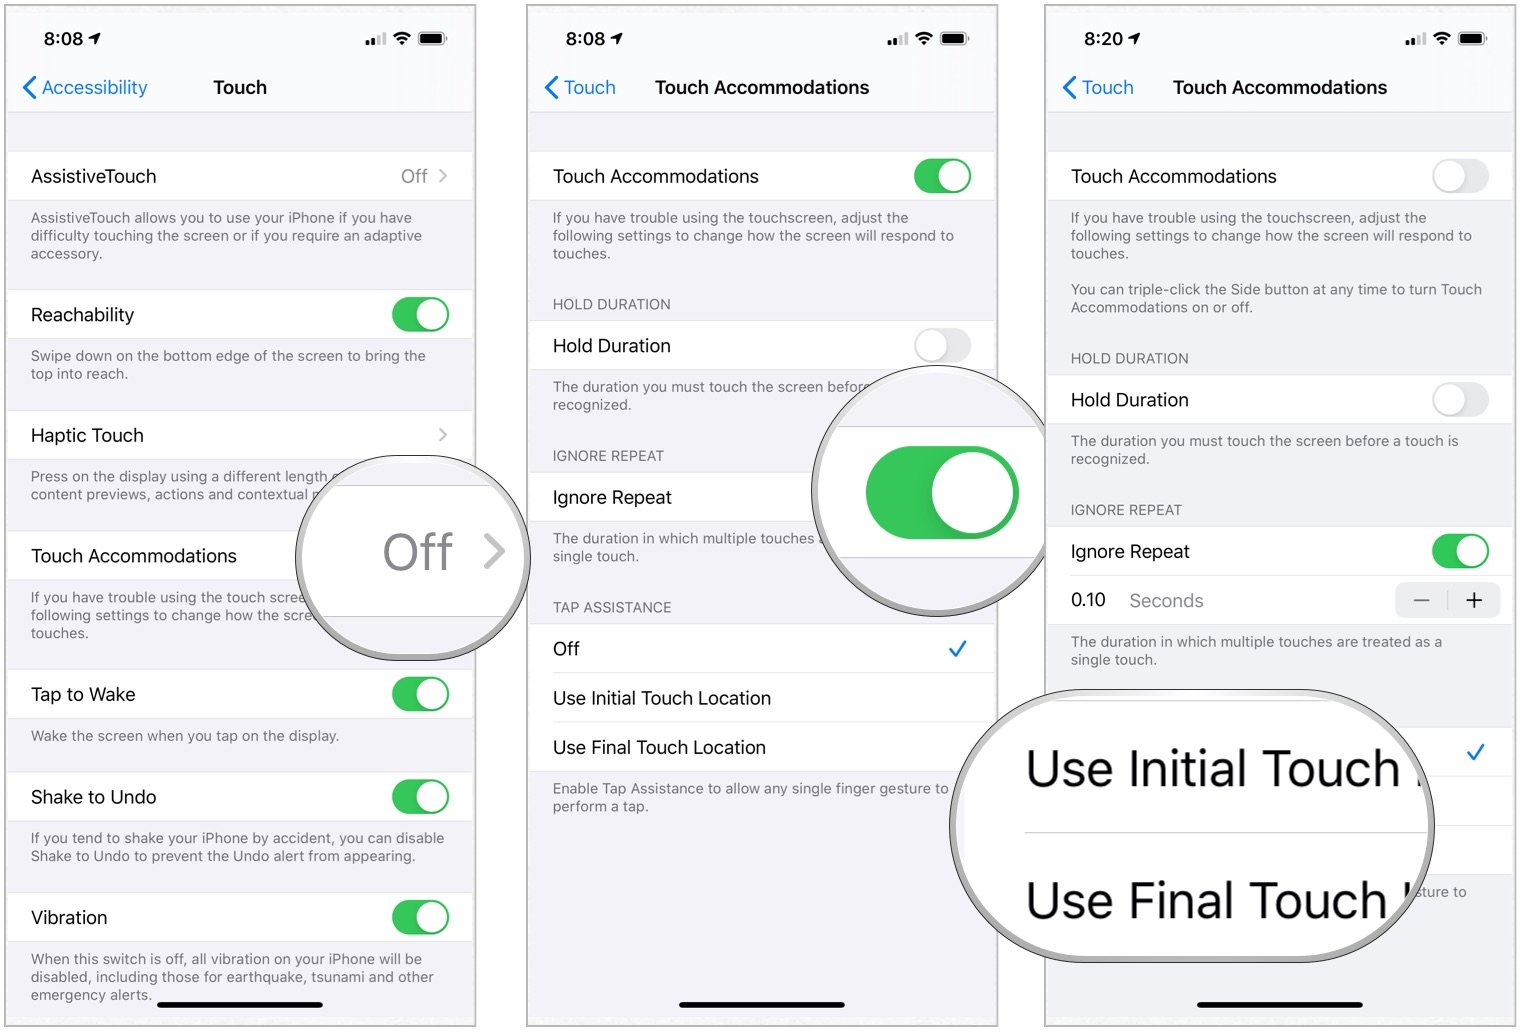 To enable and change Tap Assistance, tap Touch Accommodations, choose Use Initial Touch Location or Use Final Touch Location under Tap Assistance